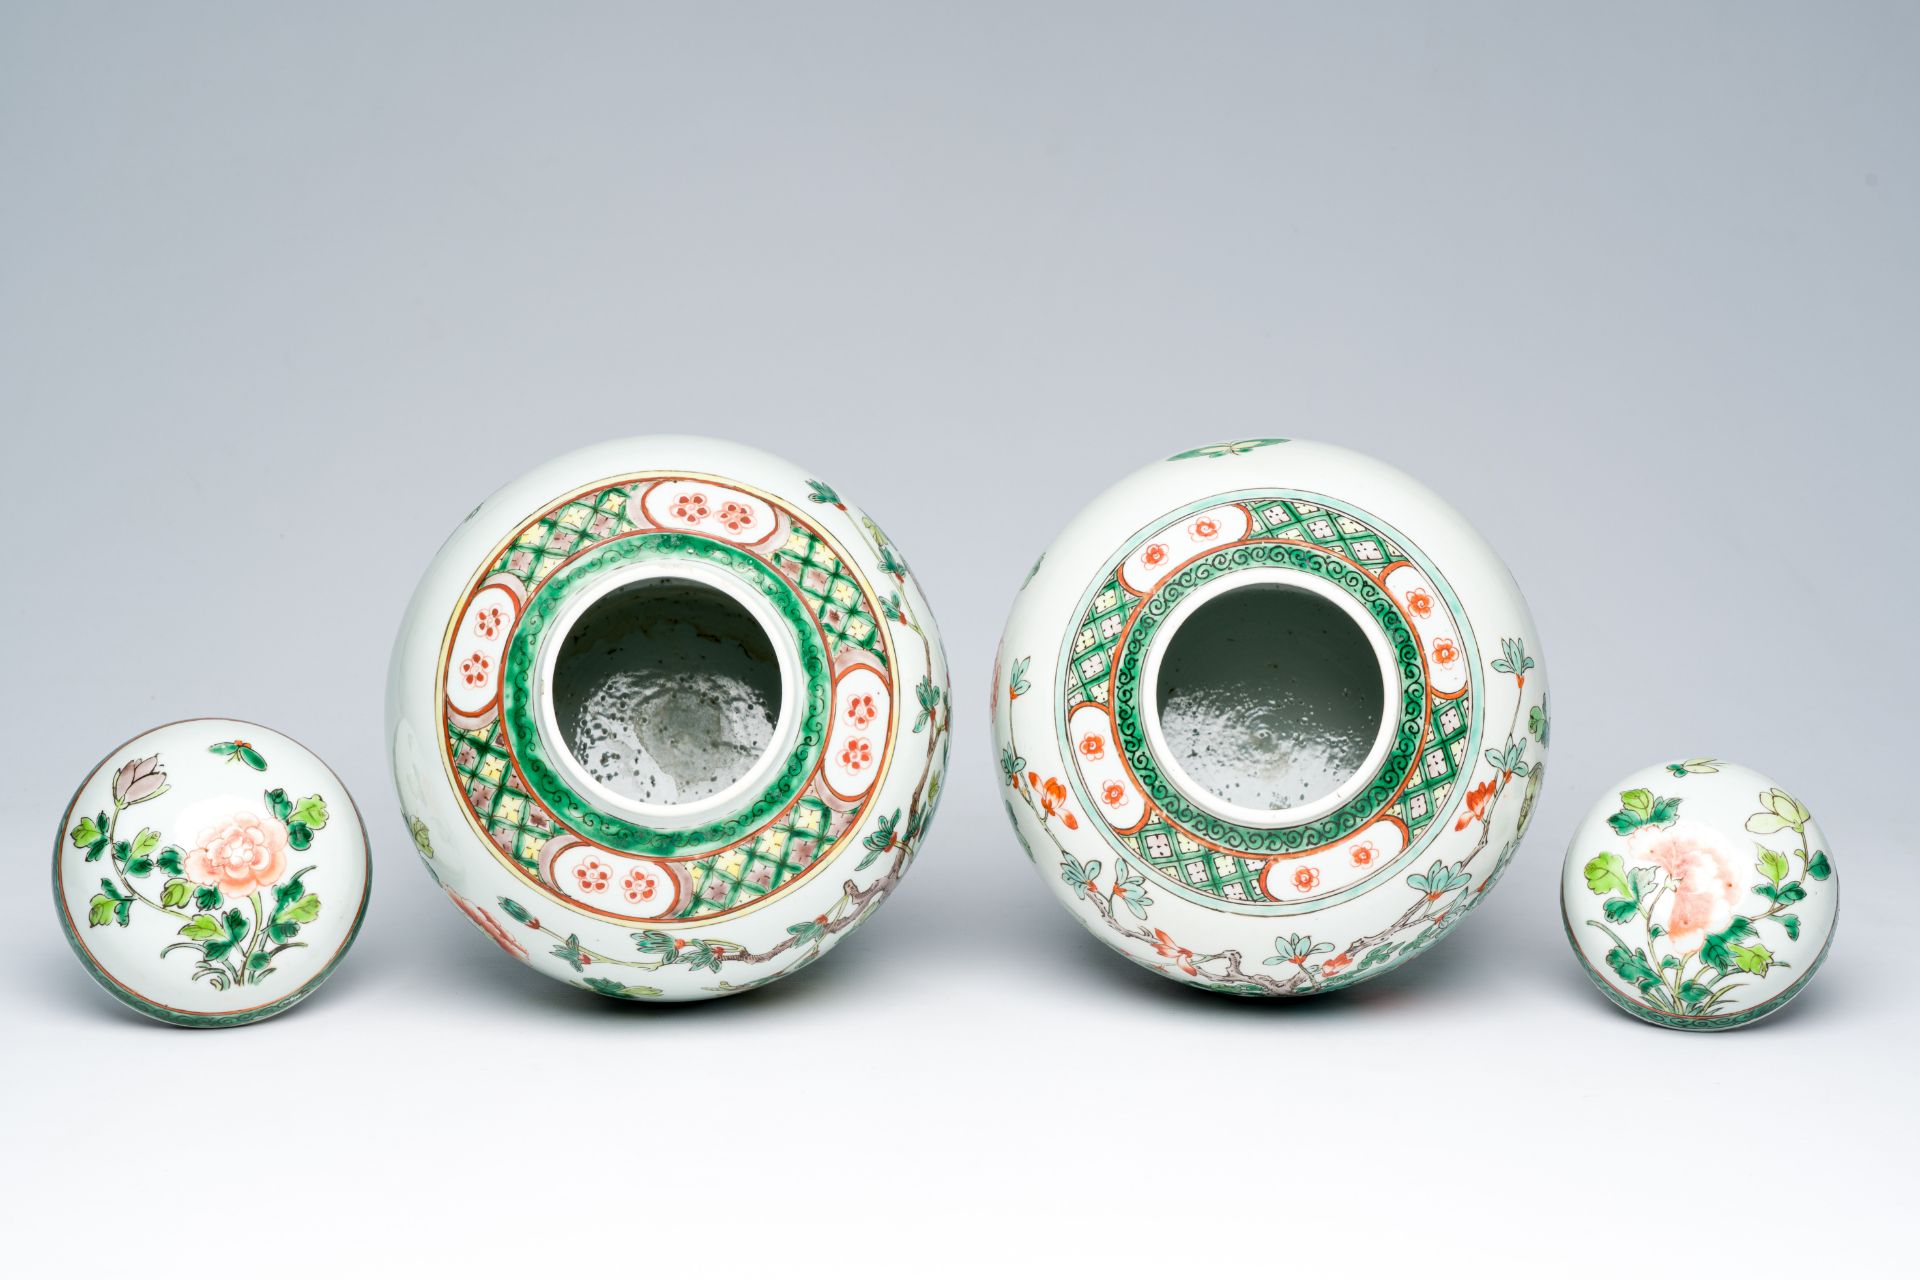 Two Chinese famille verte jars and covers with floral design, 19th C. - Image 6 of 7